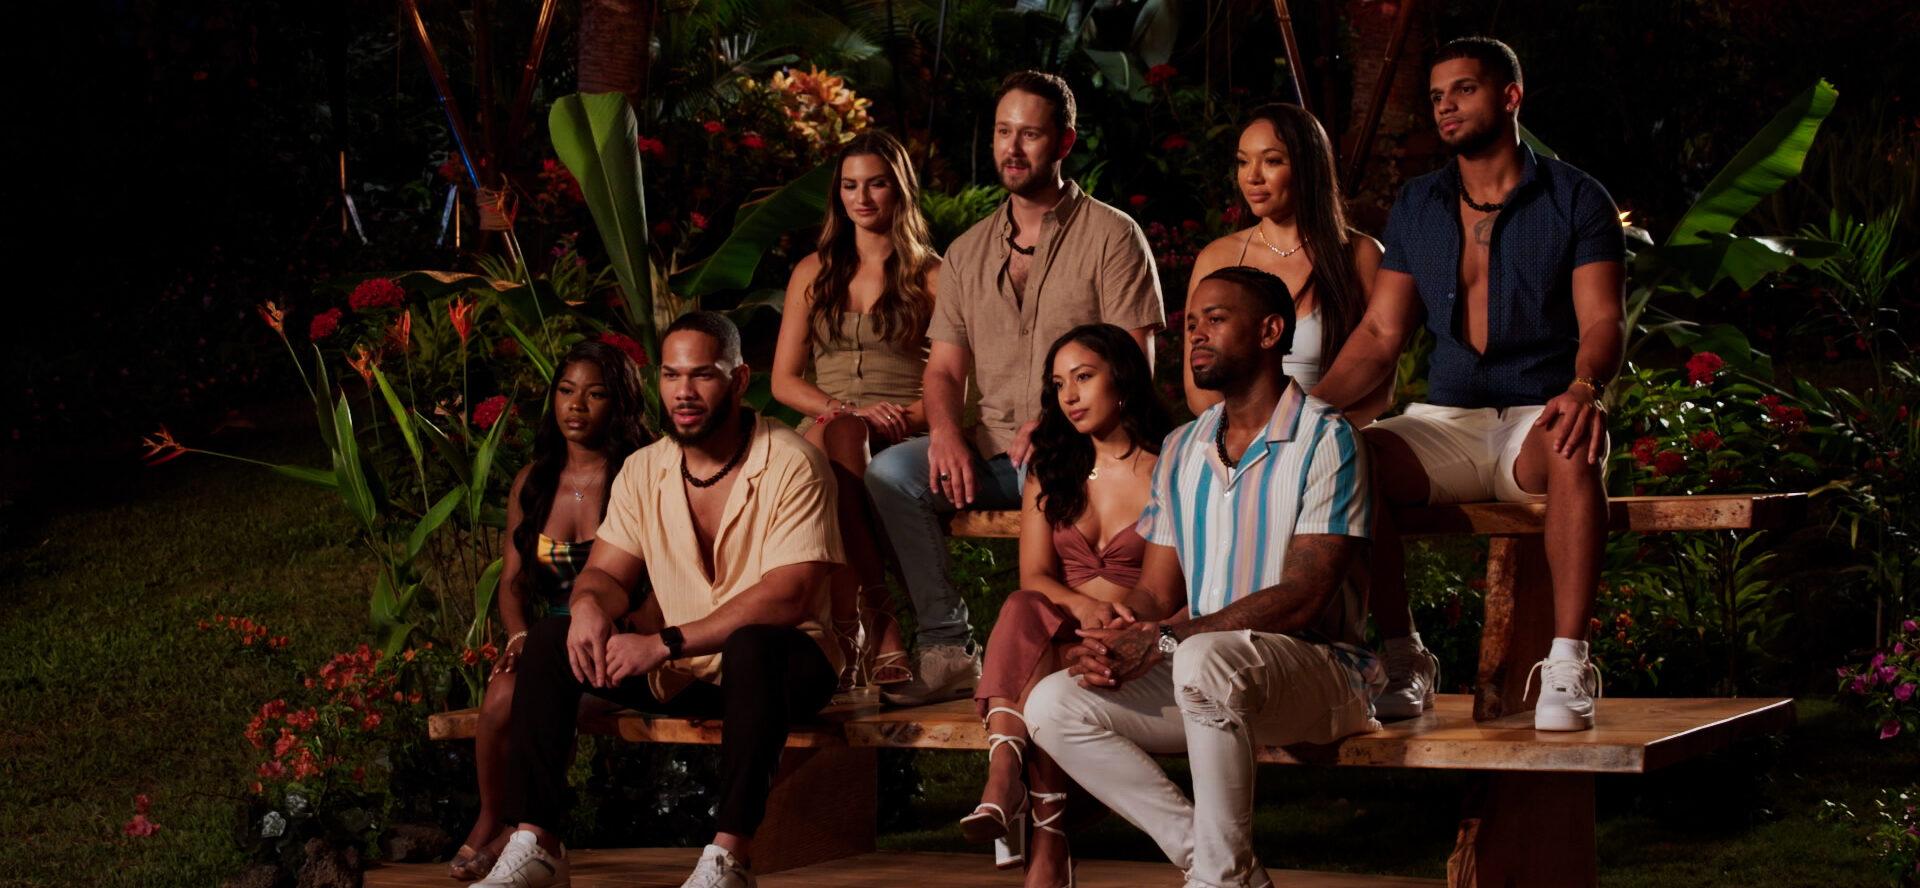 ‘Temptation Island’ Fans Take To Social Media To Share Their Thoughts